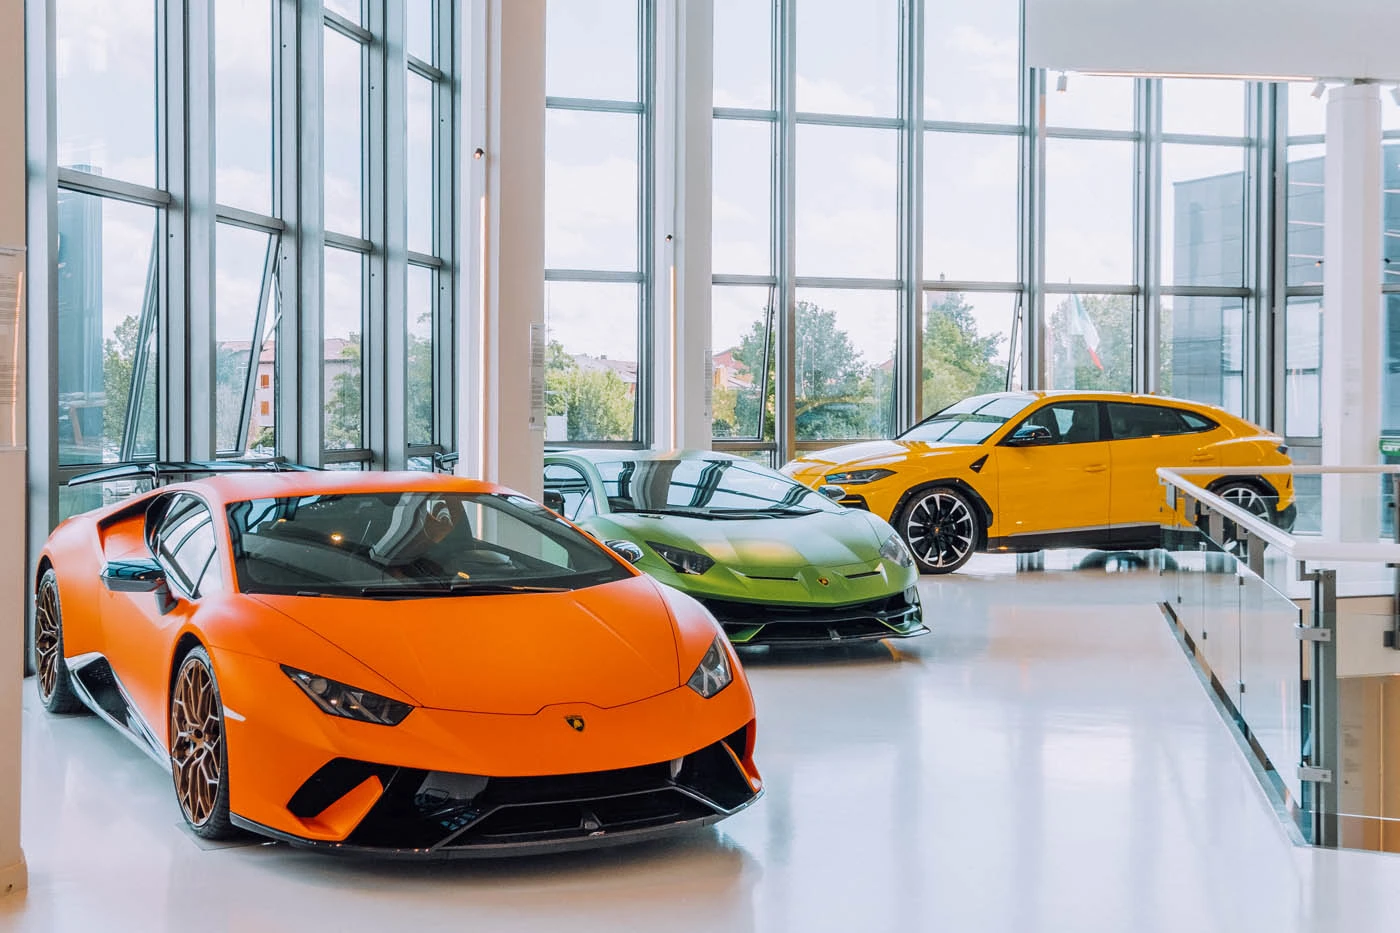 Things to Do in Bologna - Lamborghini Museum Sant’Agata Bolognese - Orange, green and yellow cars